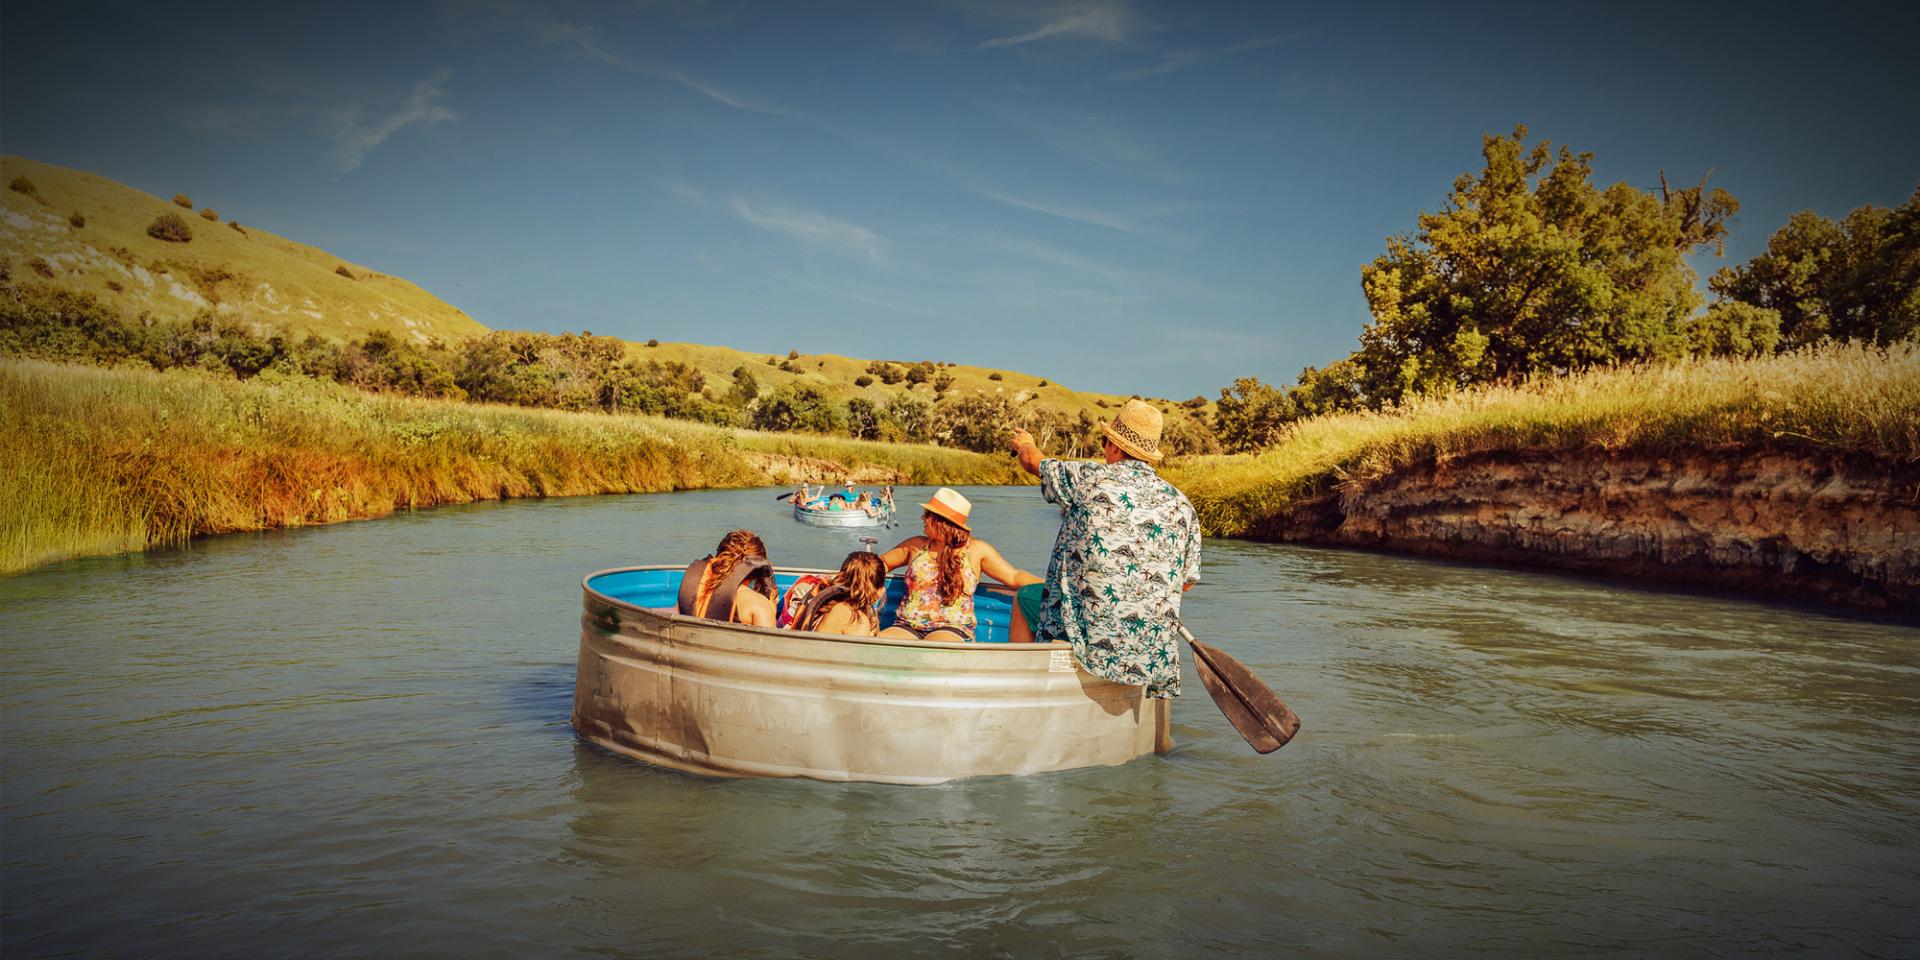 people riding in cattle tank in river